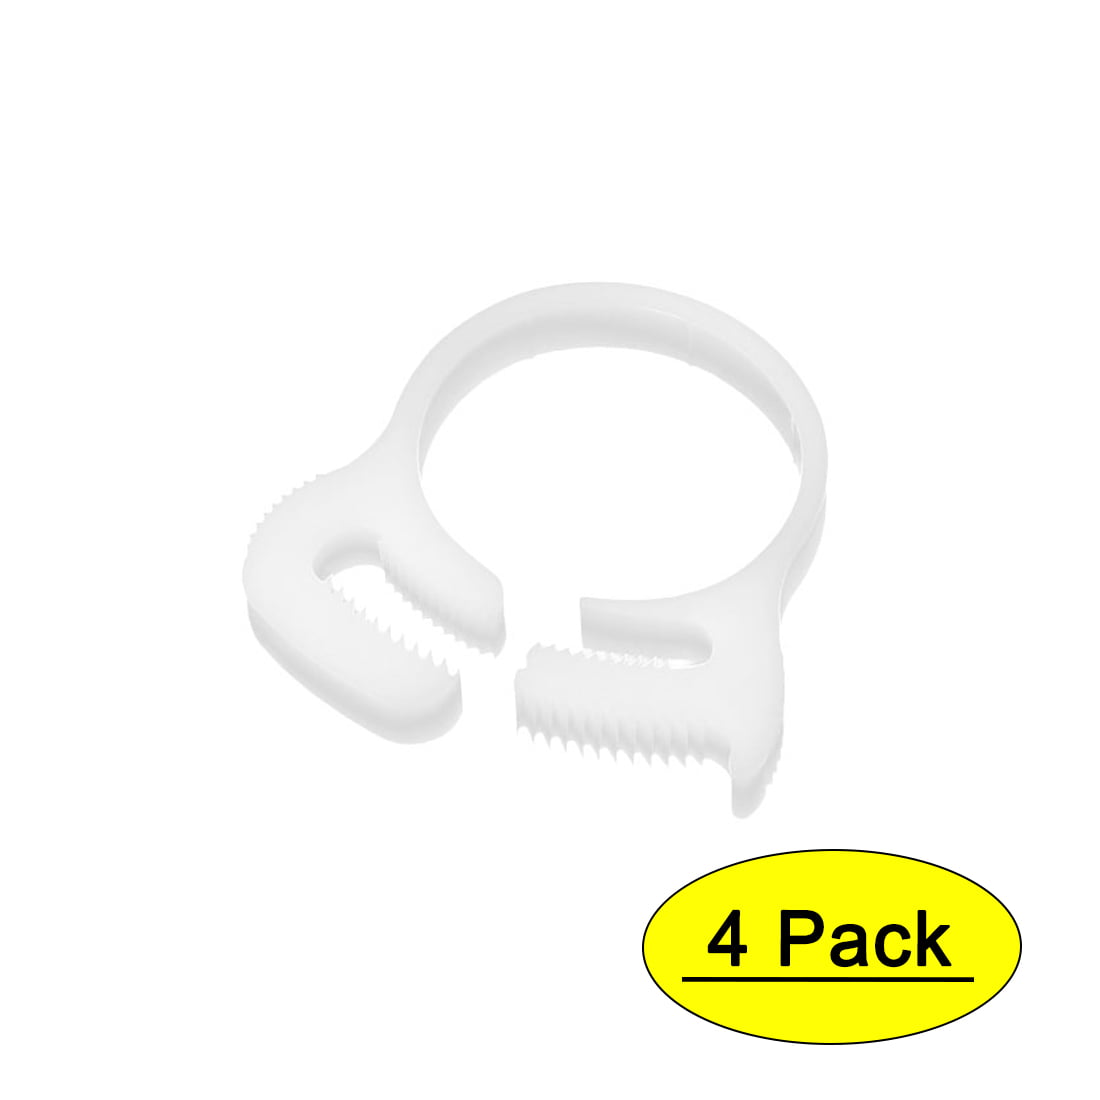 Aexit 22.8mm-24.8mm Double Clamps Gripping Ratchet Type Plastic Hose Clamps Clips White Strap Clamps 4 Pcs